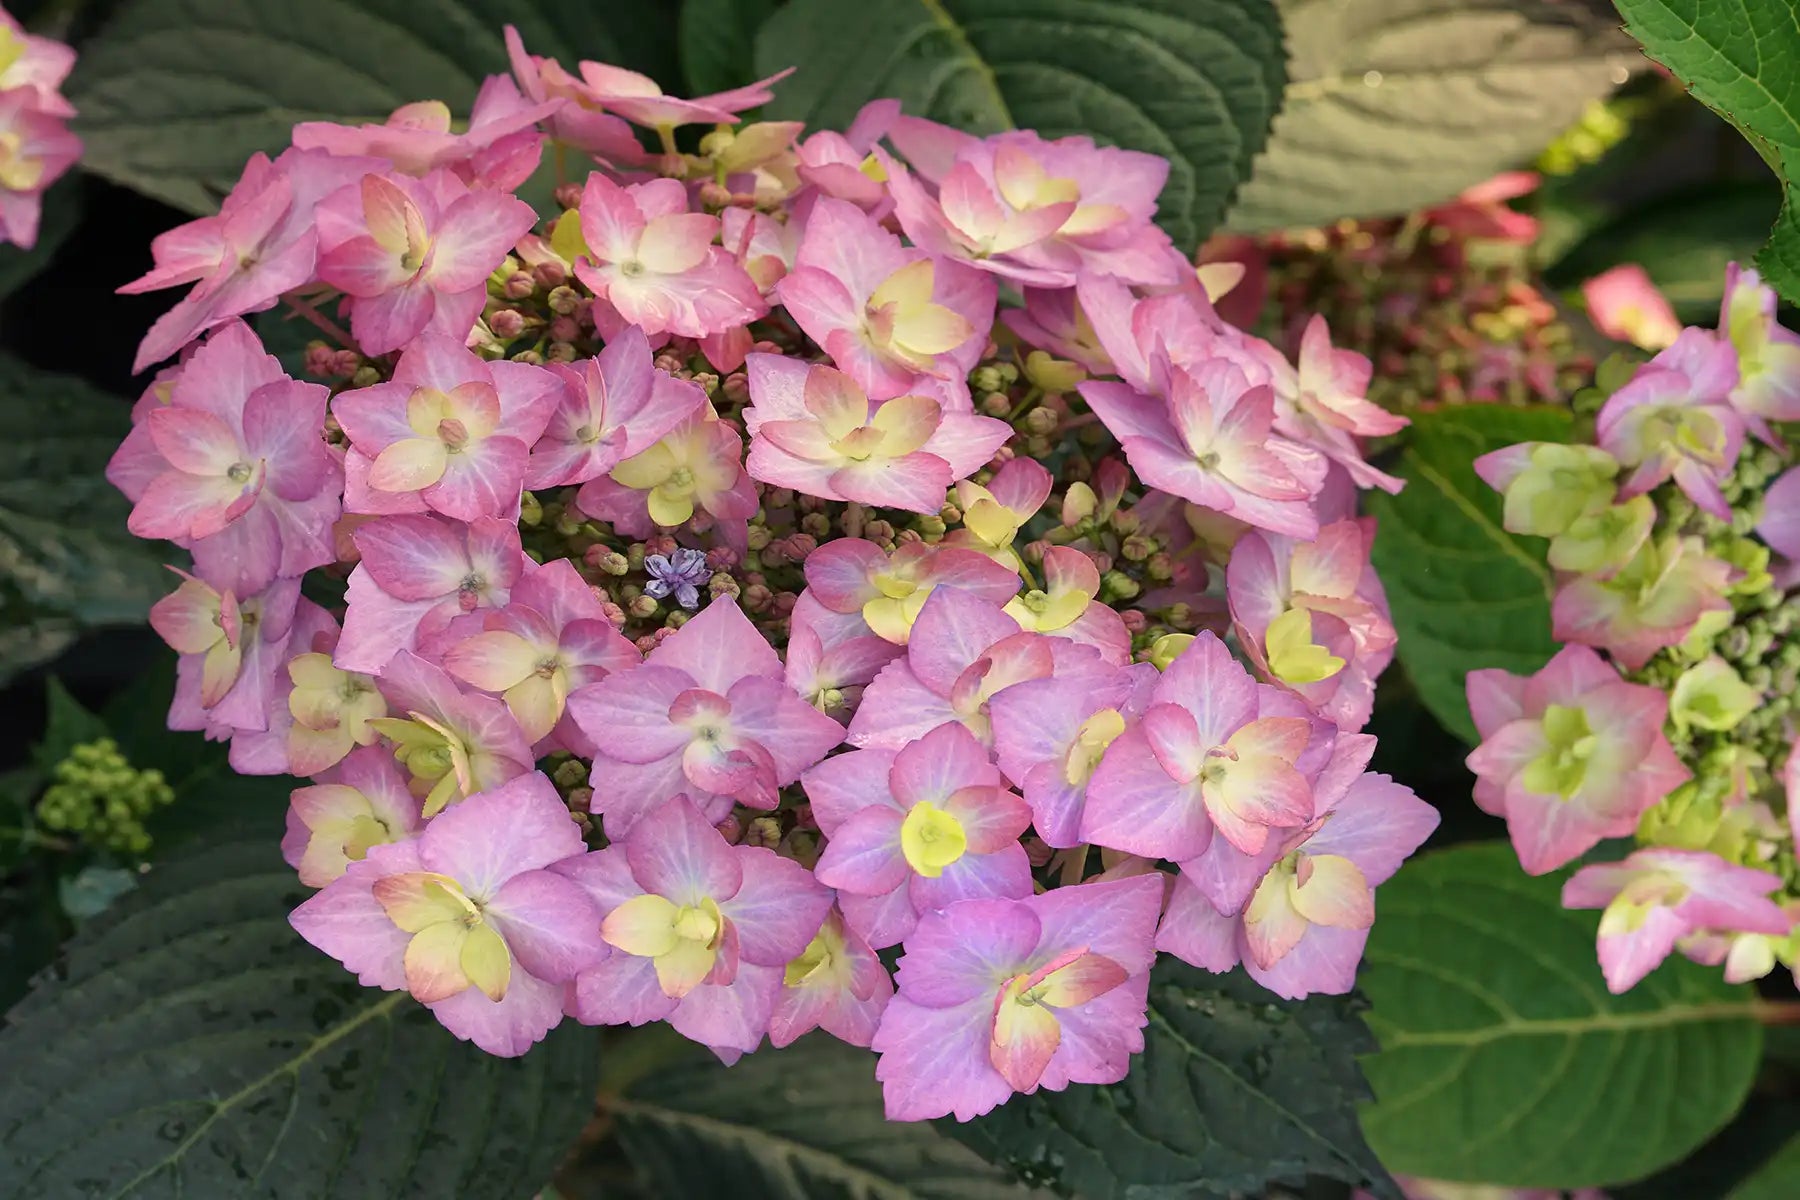 Depending on the pH of the soil, Let's Dance Can Do!® Hydrangea is either bright baby blue or pink, lik ethis example. Ph soil is what determiness the color, but both colors are positively stunning.